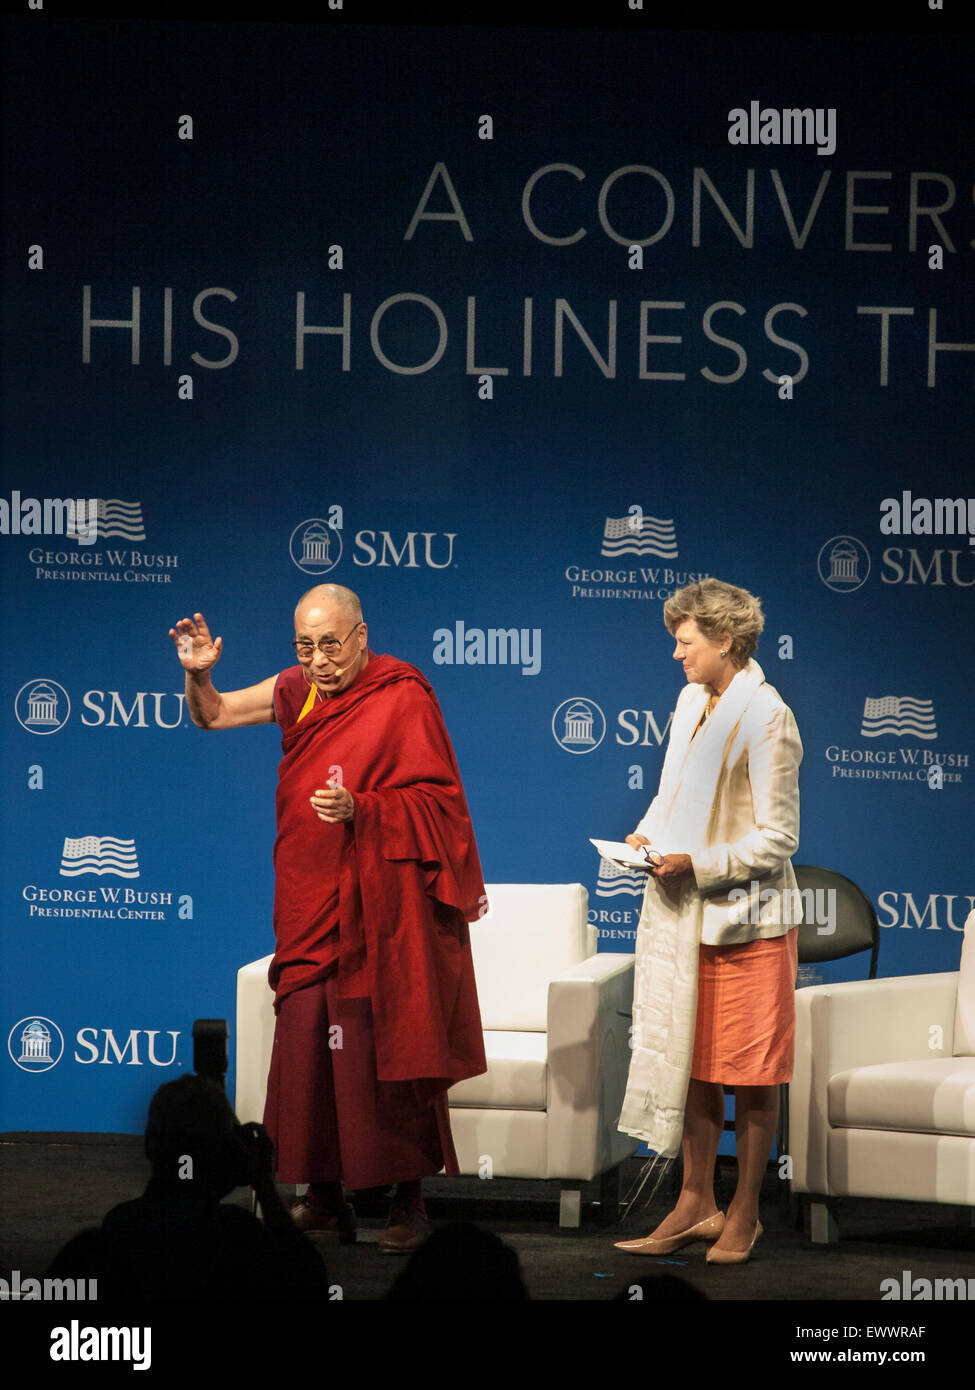 Dallas, Texas, USA. 1st July, 2015. As ABC corespondent Cokie Roberts looks on, the Dalai Lama thanks the audience for wishing him a happy 80th birthday in Dallas, Texas on Wednesday, July 1st. Credit:  J. G. Domke/Alamy Live News Stock Photo